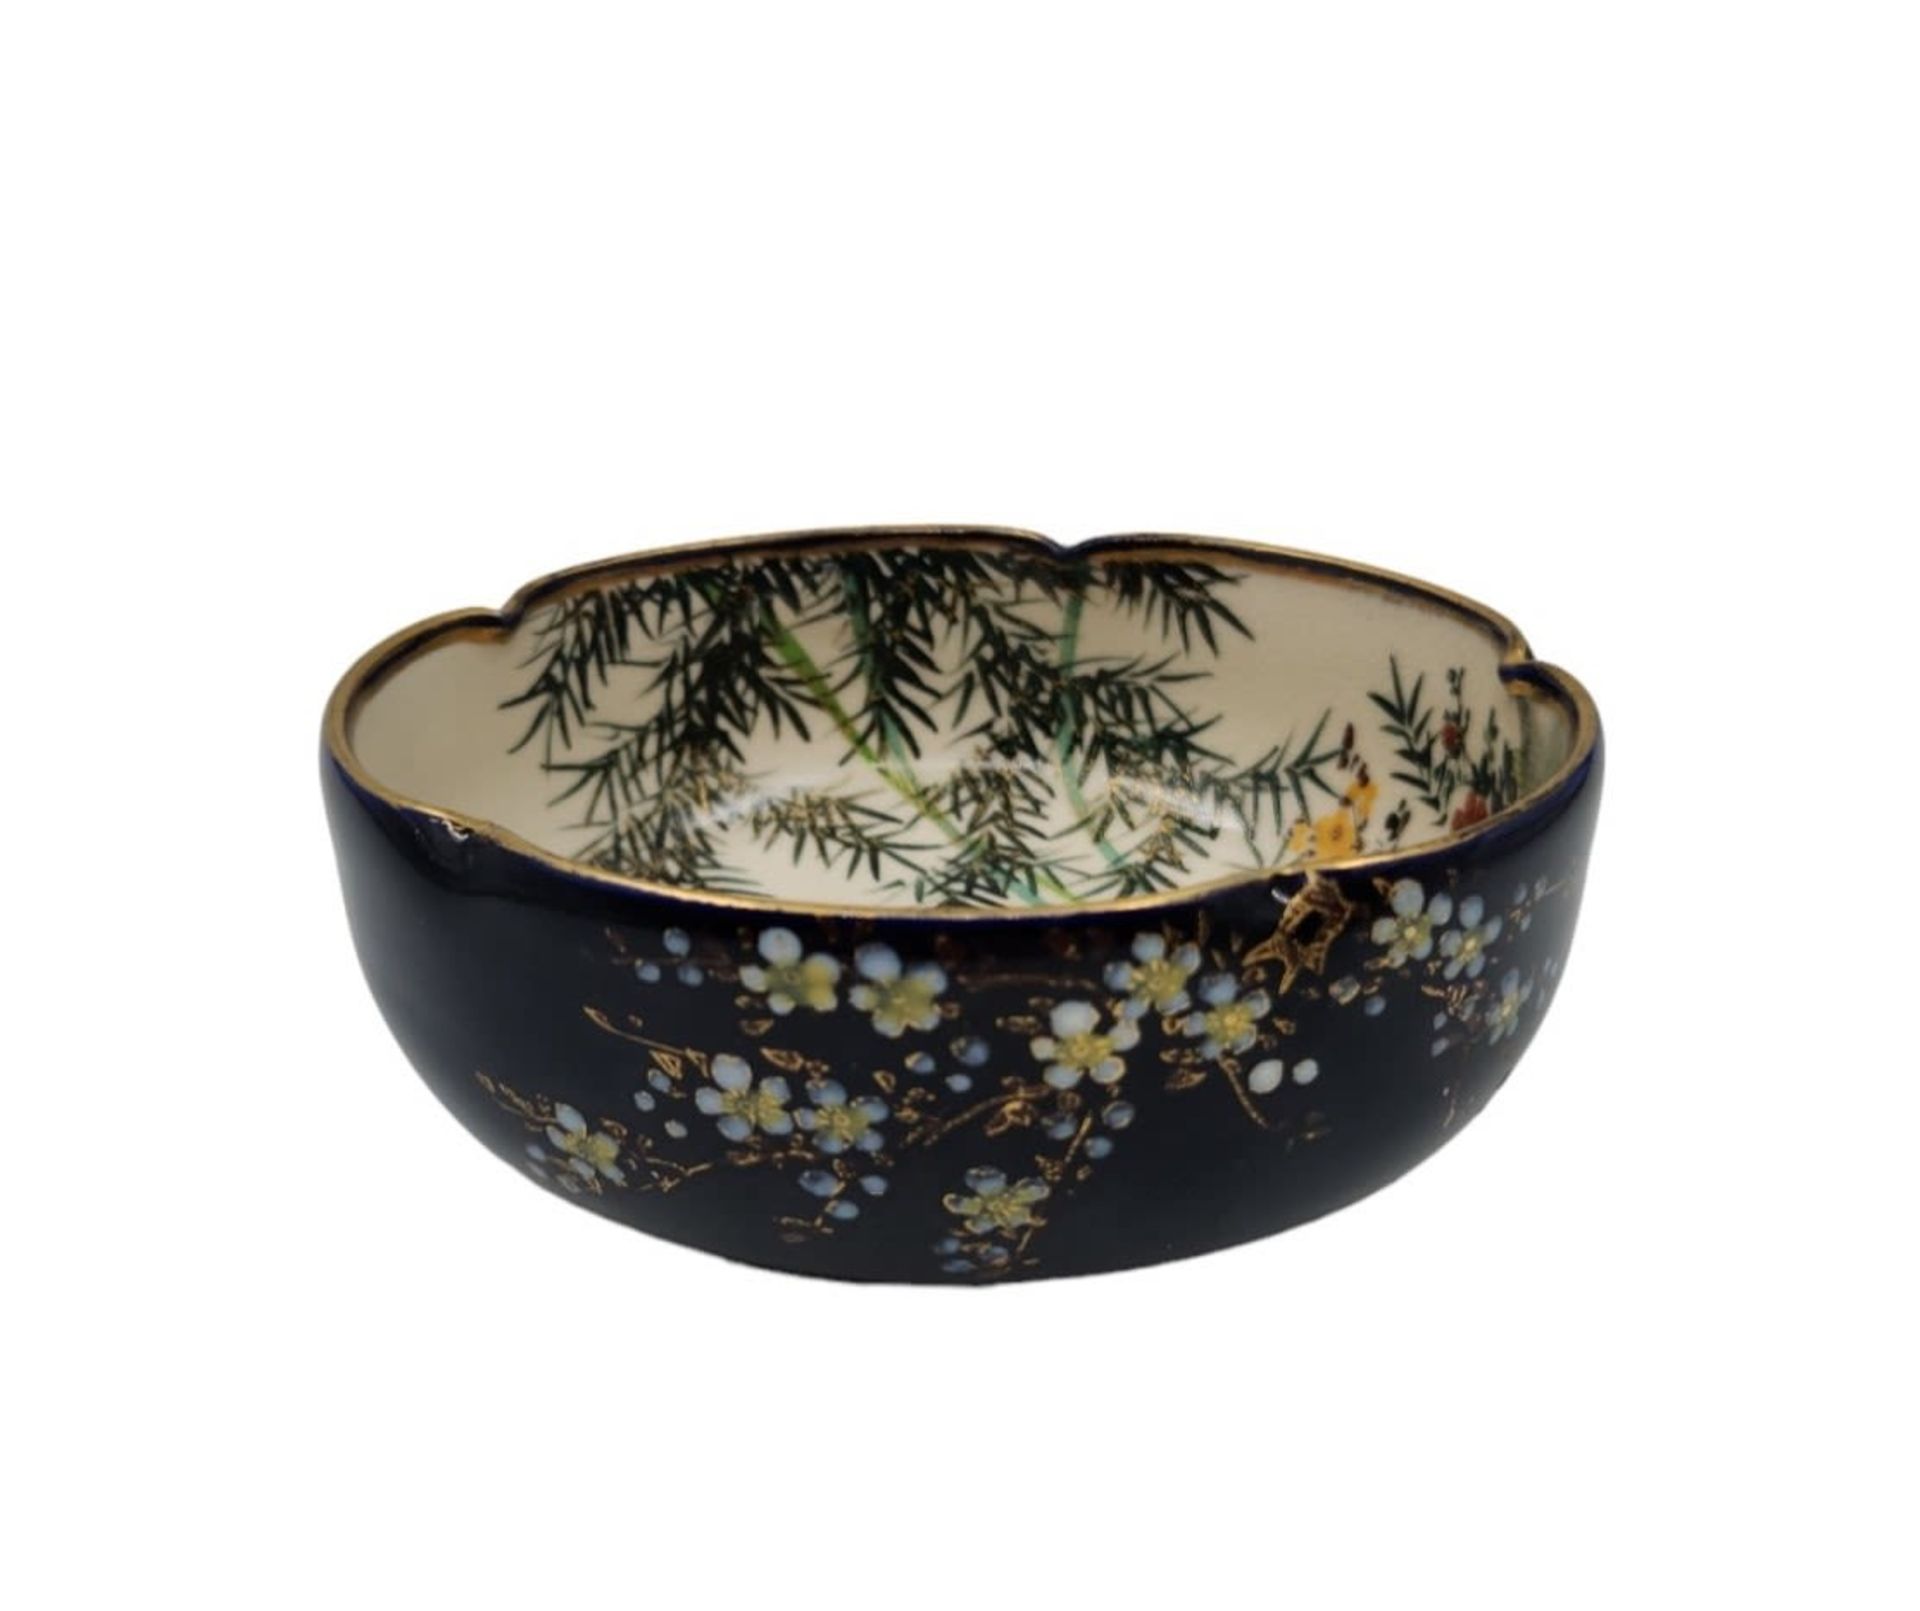 An antique and very high quality Japanese ceramic bowl made by 'Koshida', decorated with hand - Image 2 of 6